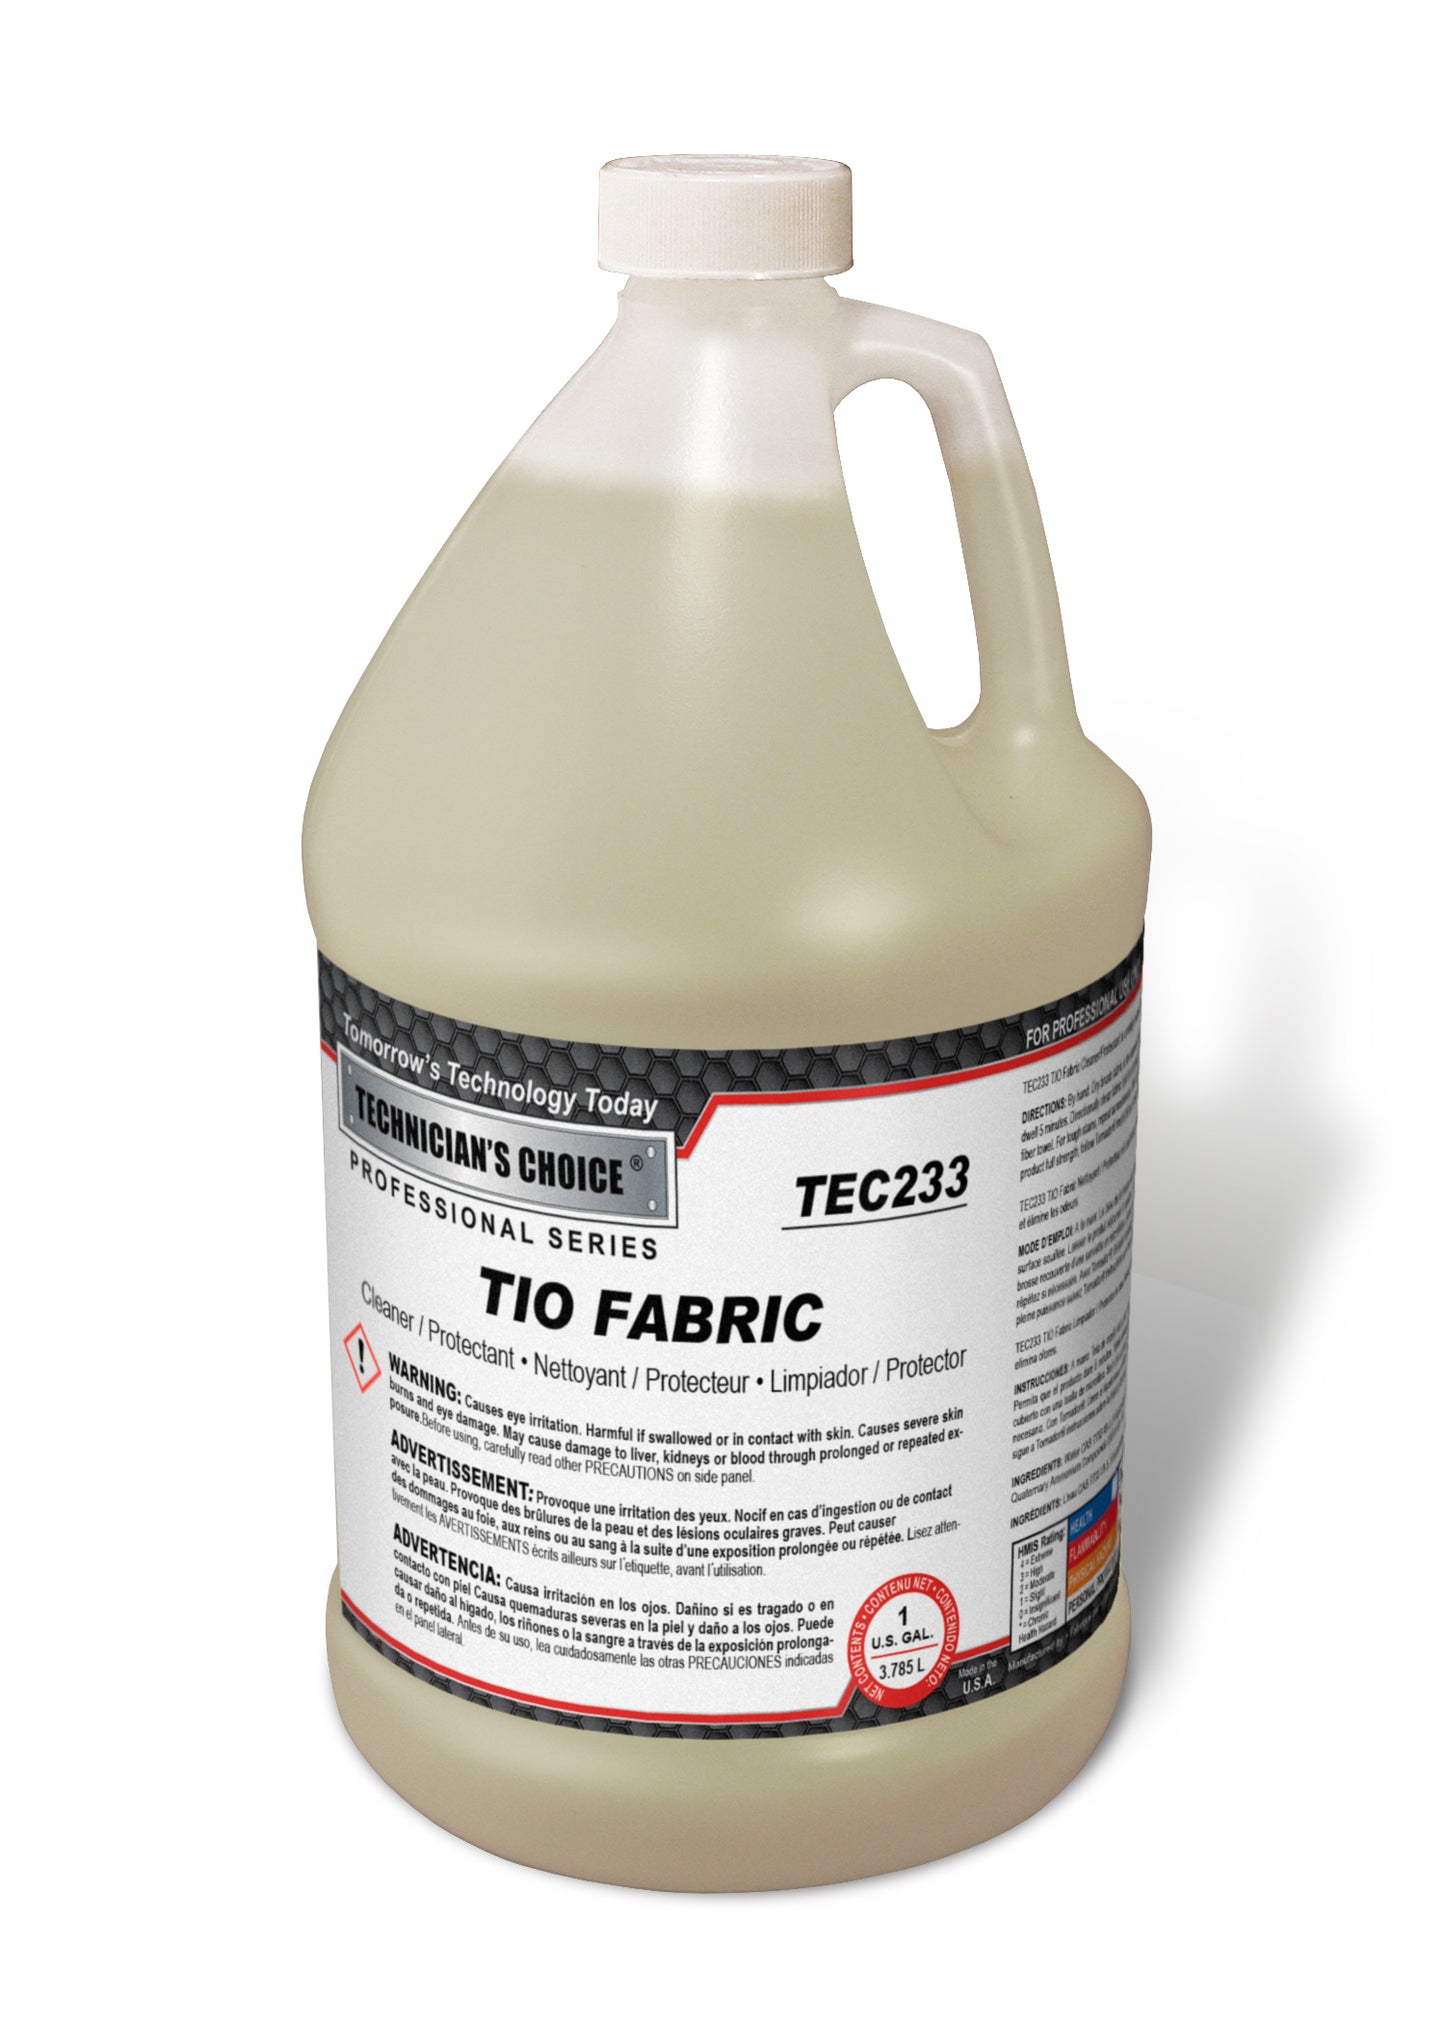 TAKE IT OUT FABRIC CLEANER / PROTECTANT